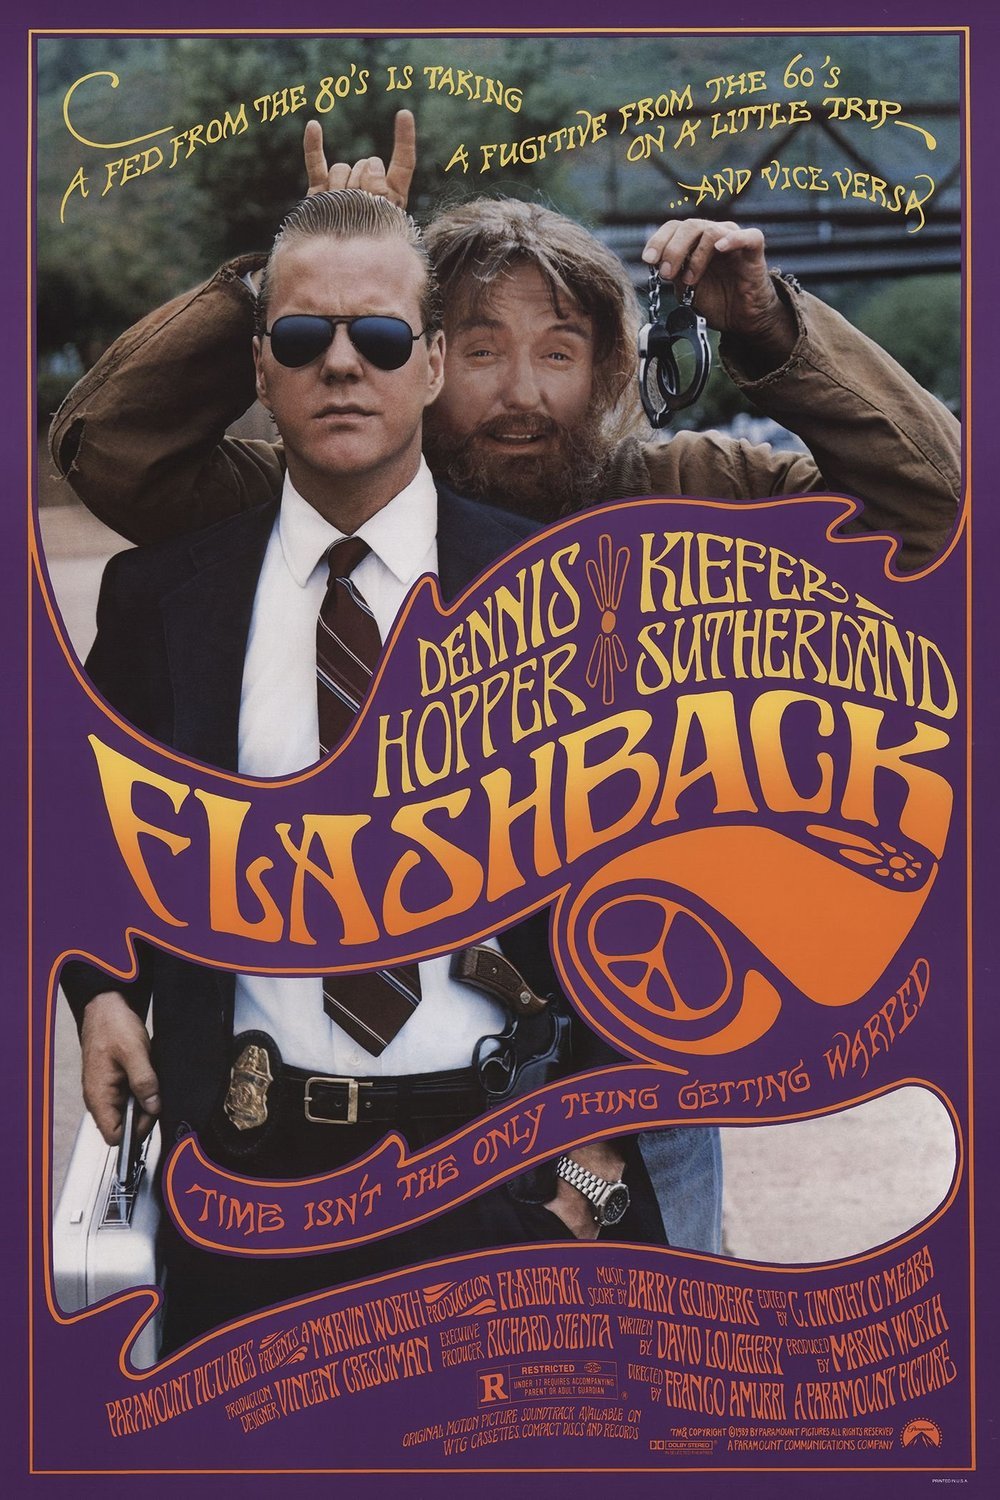 Poster of the movie Flashback